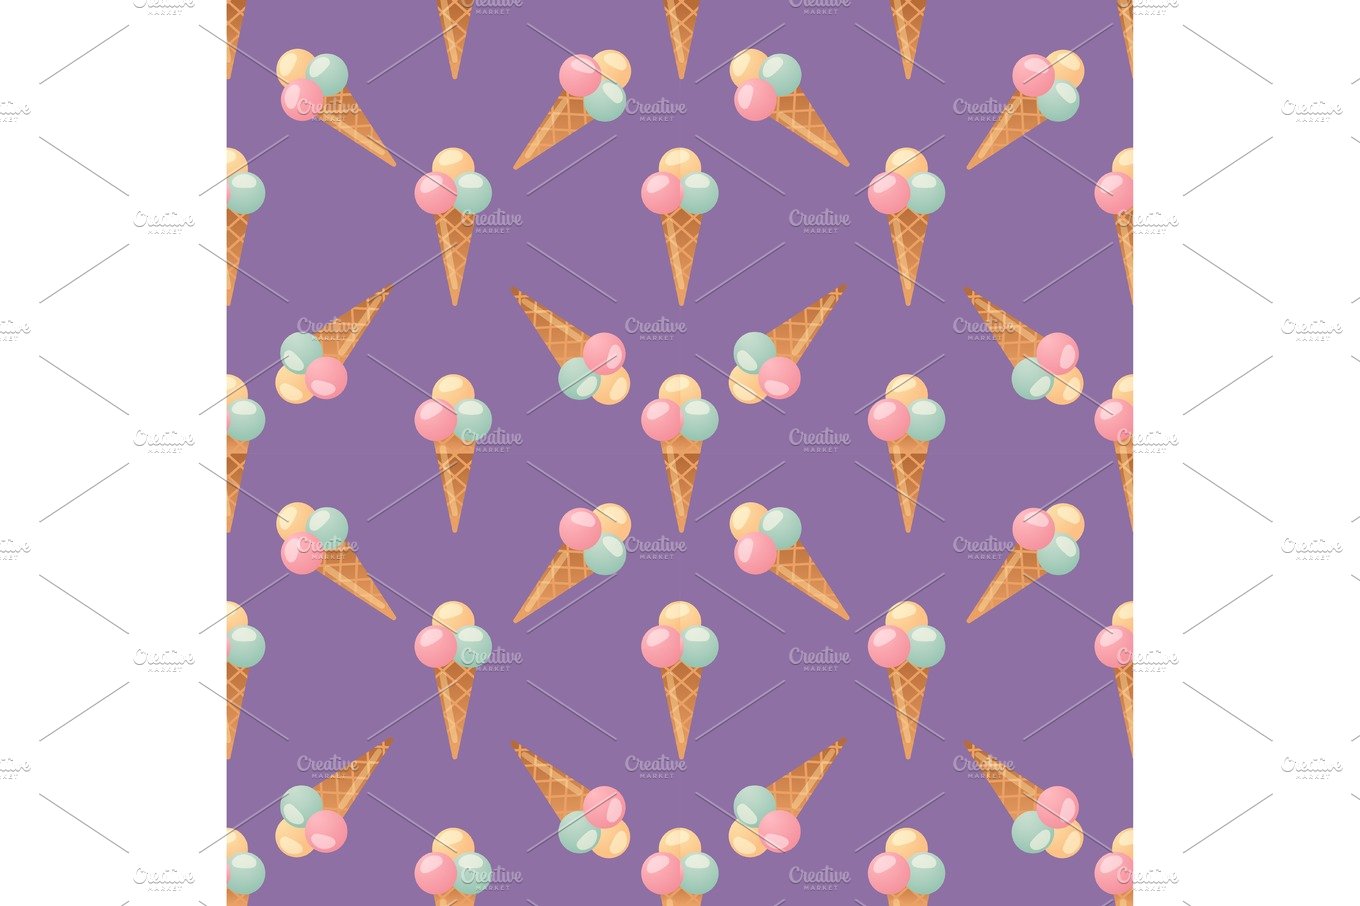 ice cream seamless pattern background fruit vector illustration cover image.